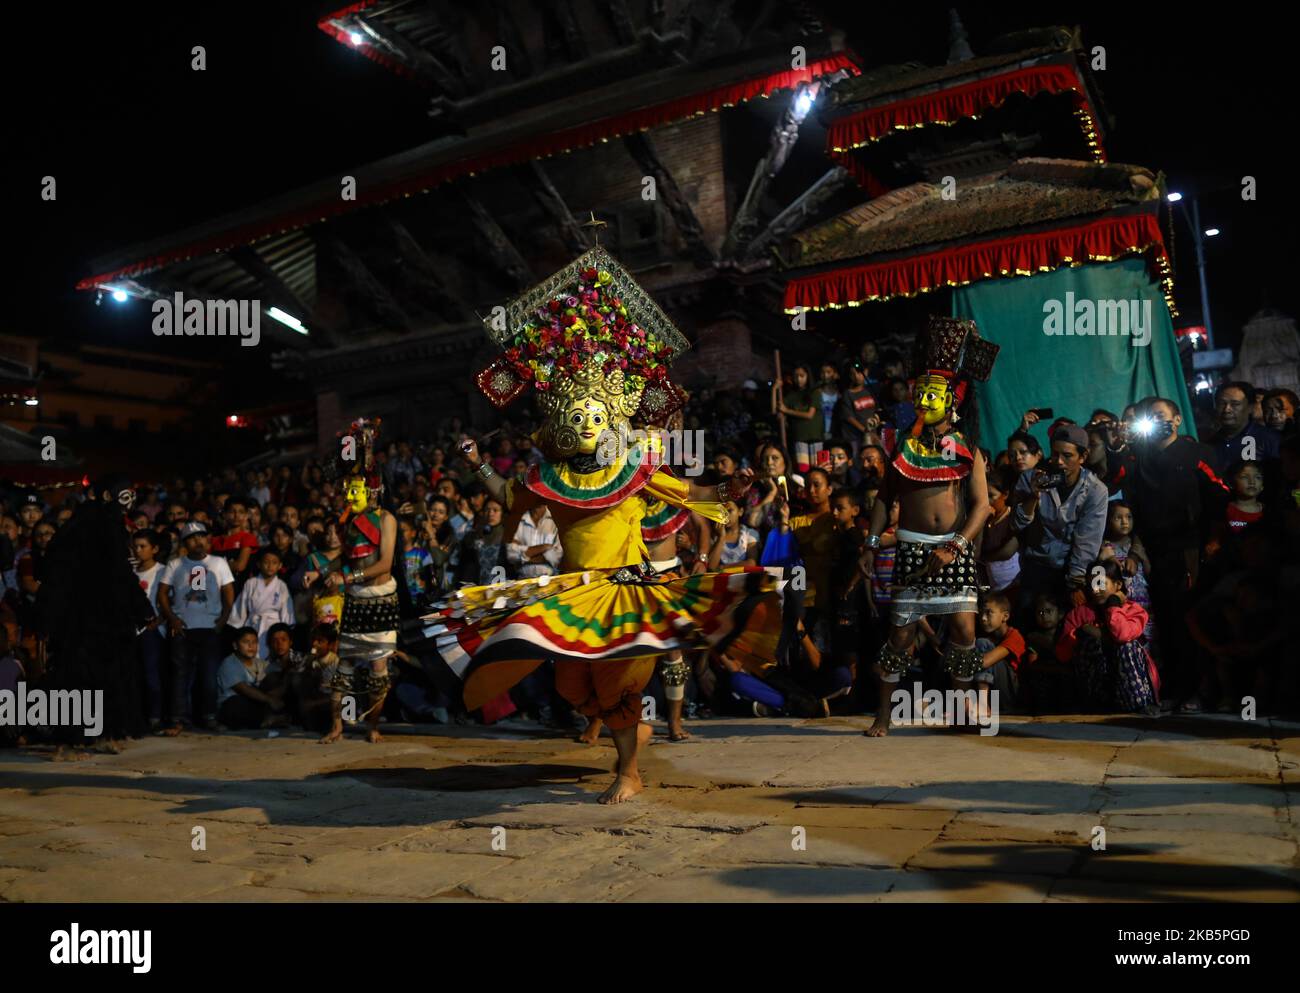 Nepalese mask dancer performs traditional Mahakali dance during the second day of Indra Jatra festival at the premises of Hanuman Dhoka Durbar Square in Kathmandu, Nepal on September 11, 2019. The eight-day long Indra Jatra festival falls in September and is one of the most exciting and revered festivals of the Newar community of the Kathmandu Valley. (Photo by Saroj Baizu/NurPhoto) Stock Photo